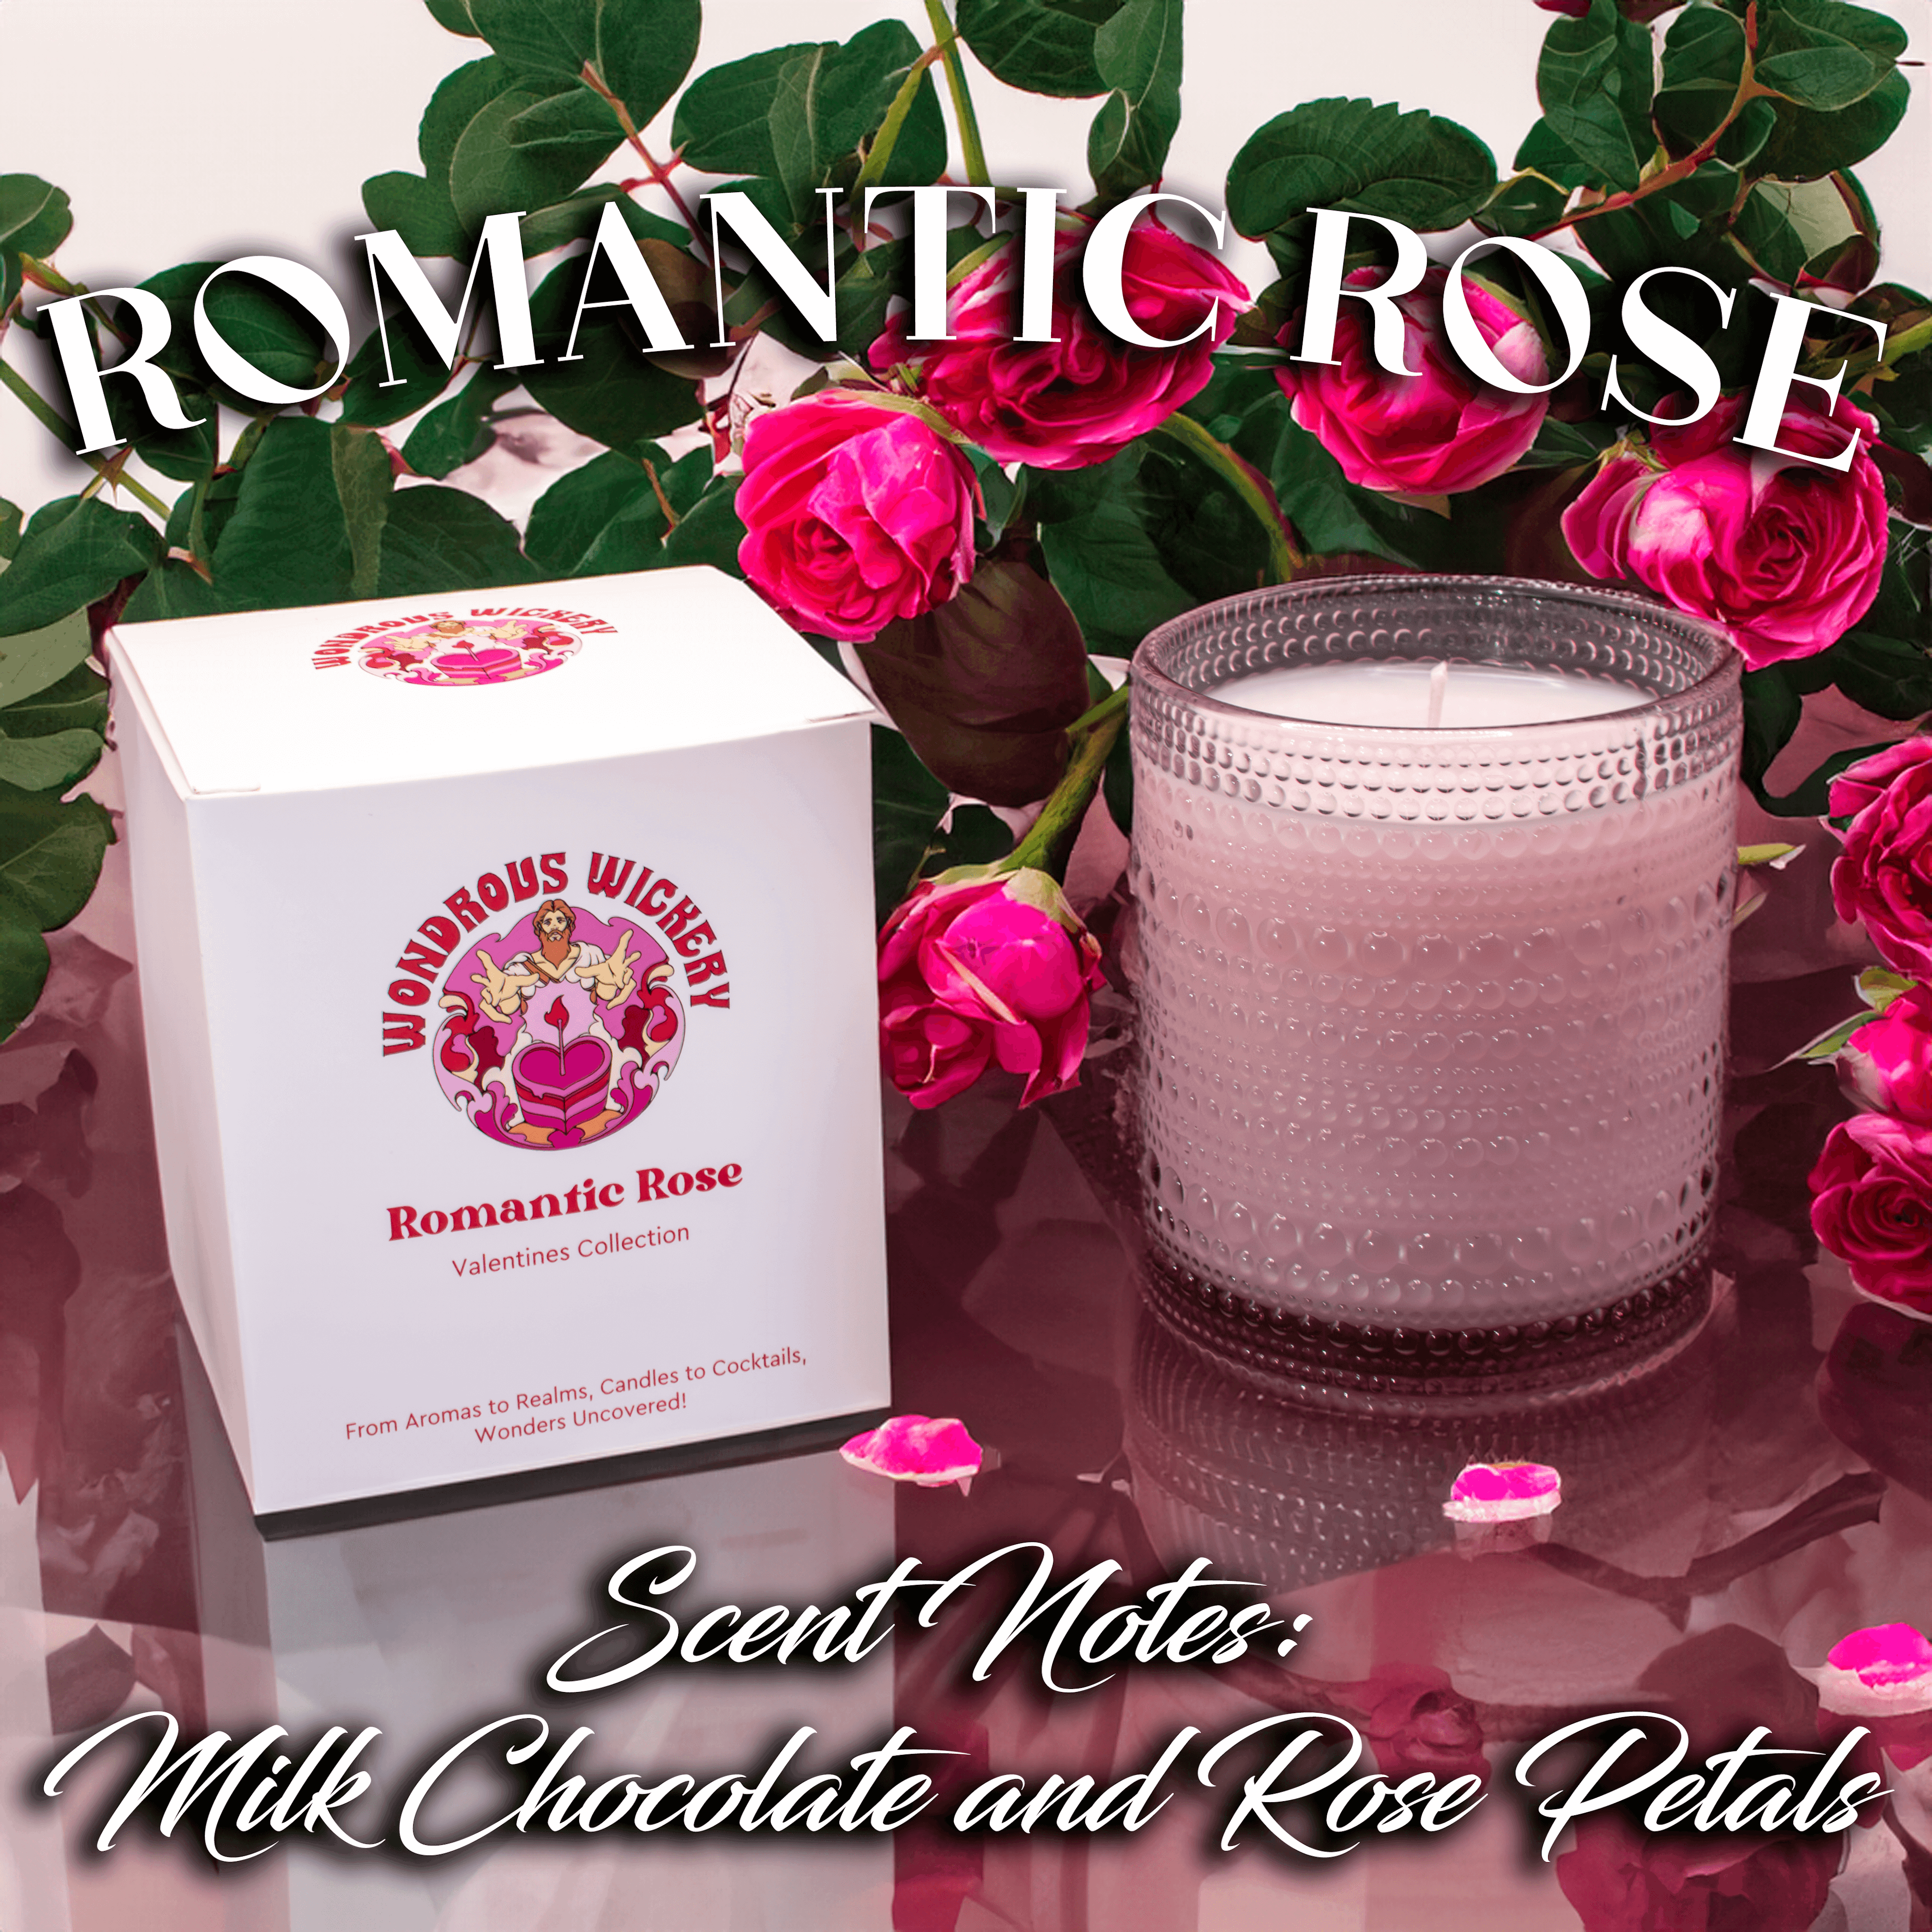 Romantic Rose Candle / Candle to Cocktail Experience / Valentines Collection / LIMITED Edition / Unique Candle Gift / Candles - undefined - Wondrous Wickery